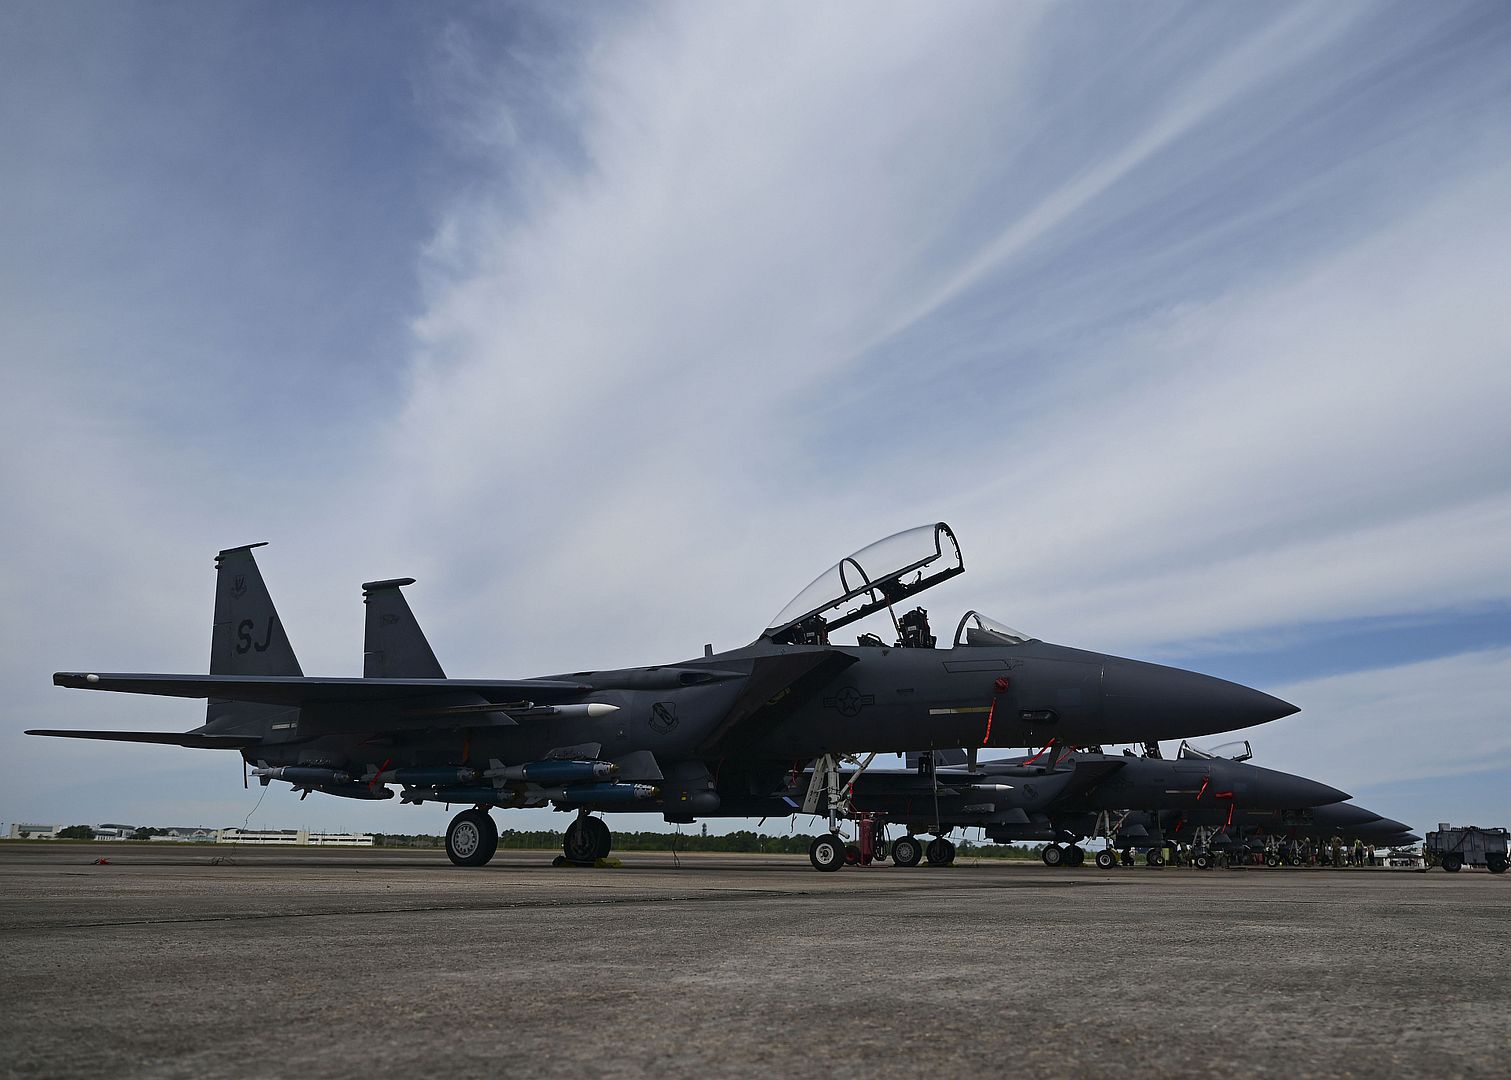 15E Strike Eagle Aircraft Assigned To 4th Fighter Wing Arrive At The Combat Readiness Training Center Gulfport Mississippi April 18 2023 During Exercise Southern Strike 2023